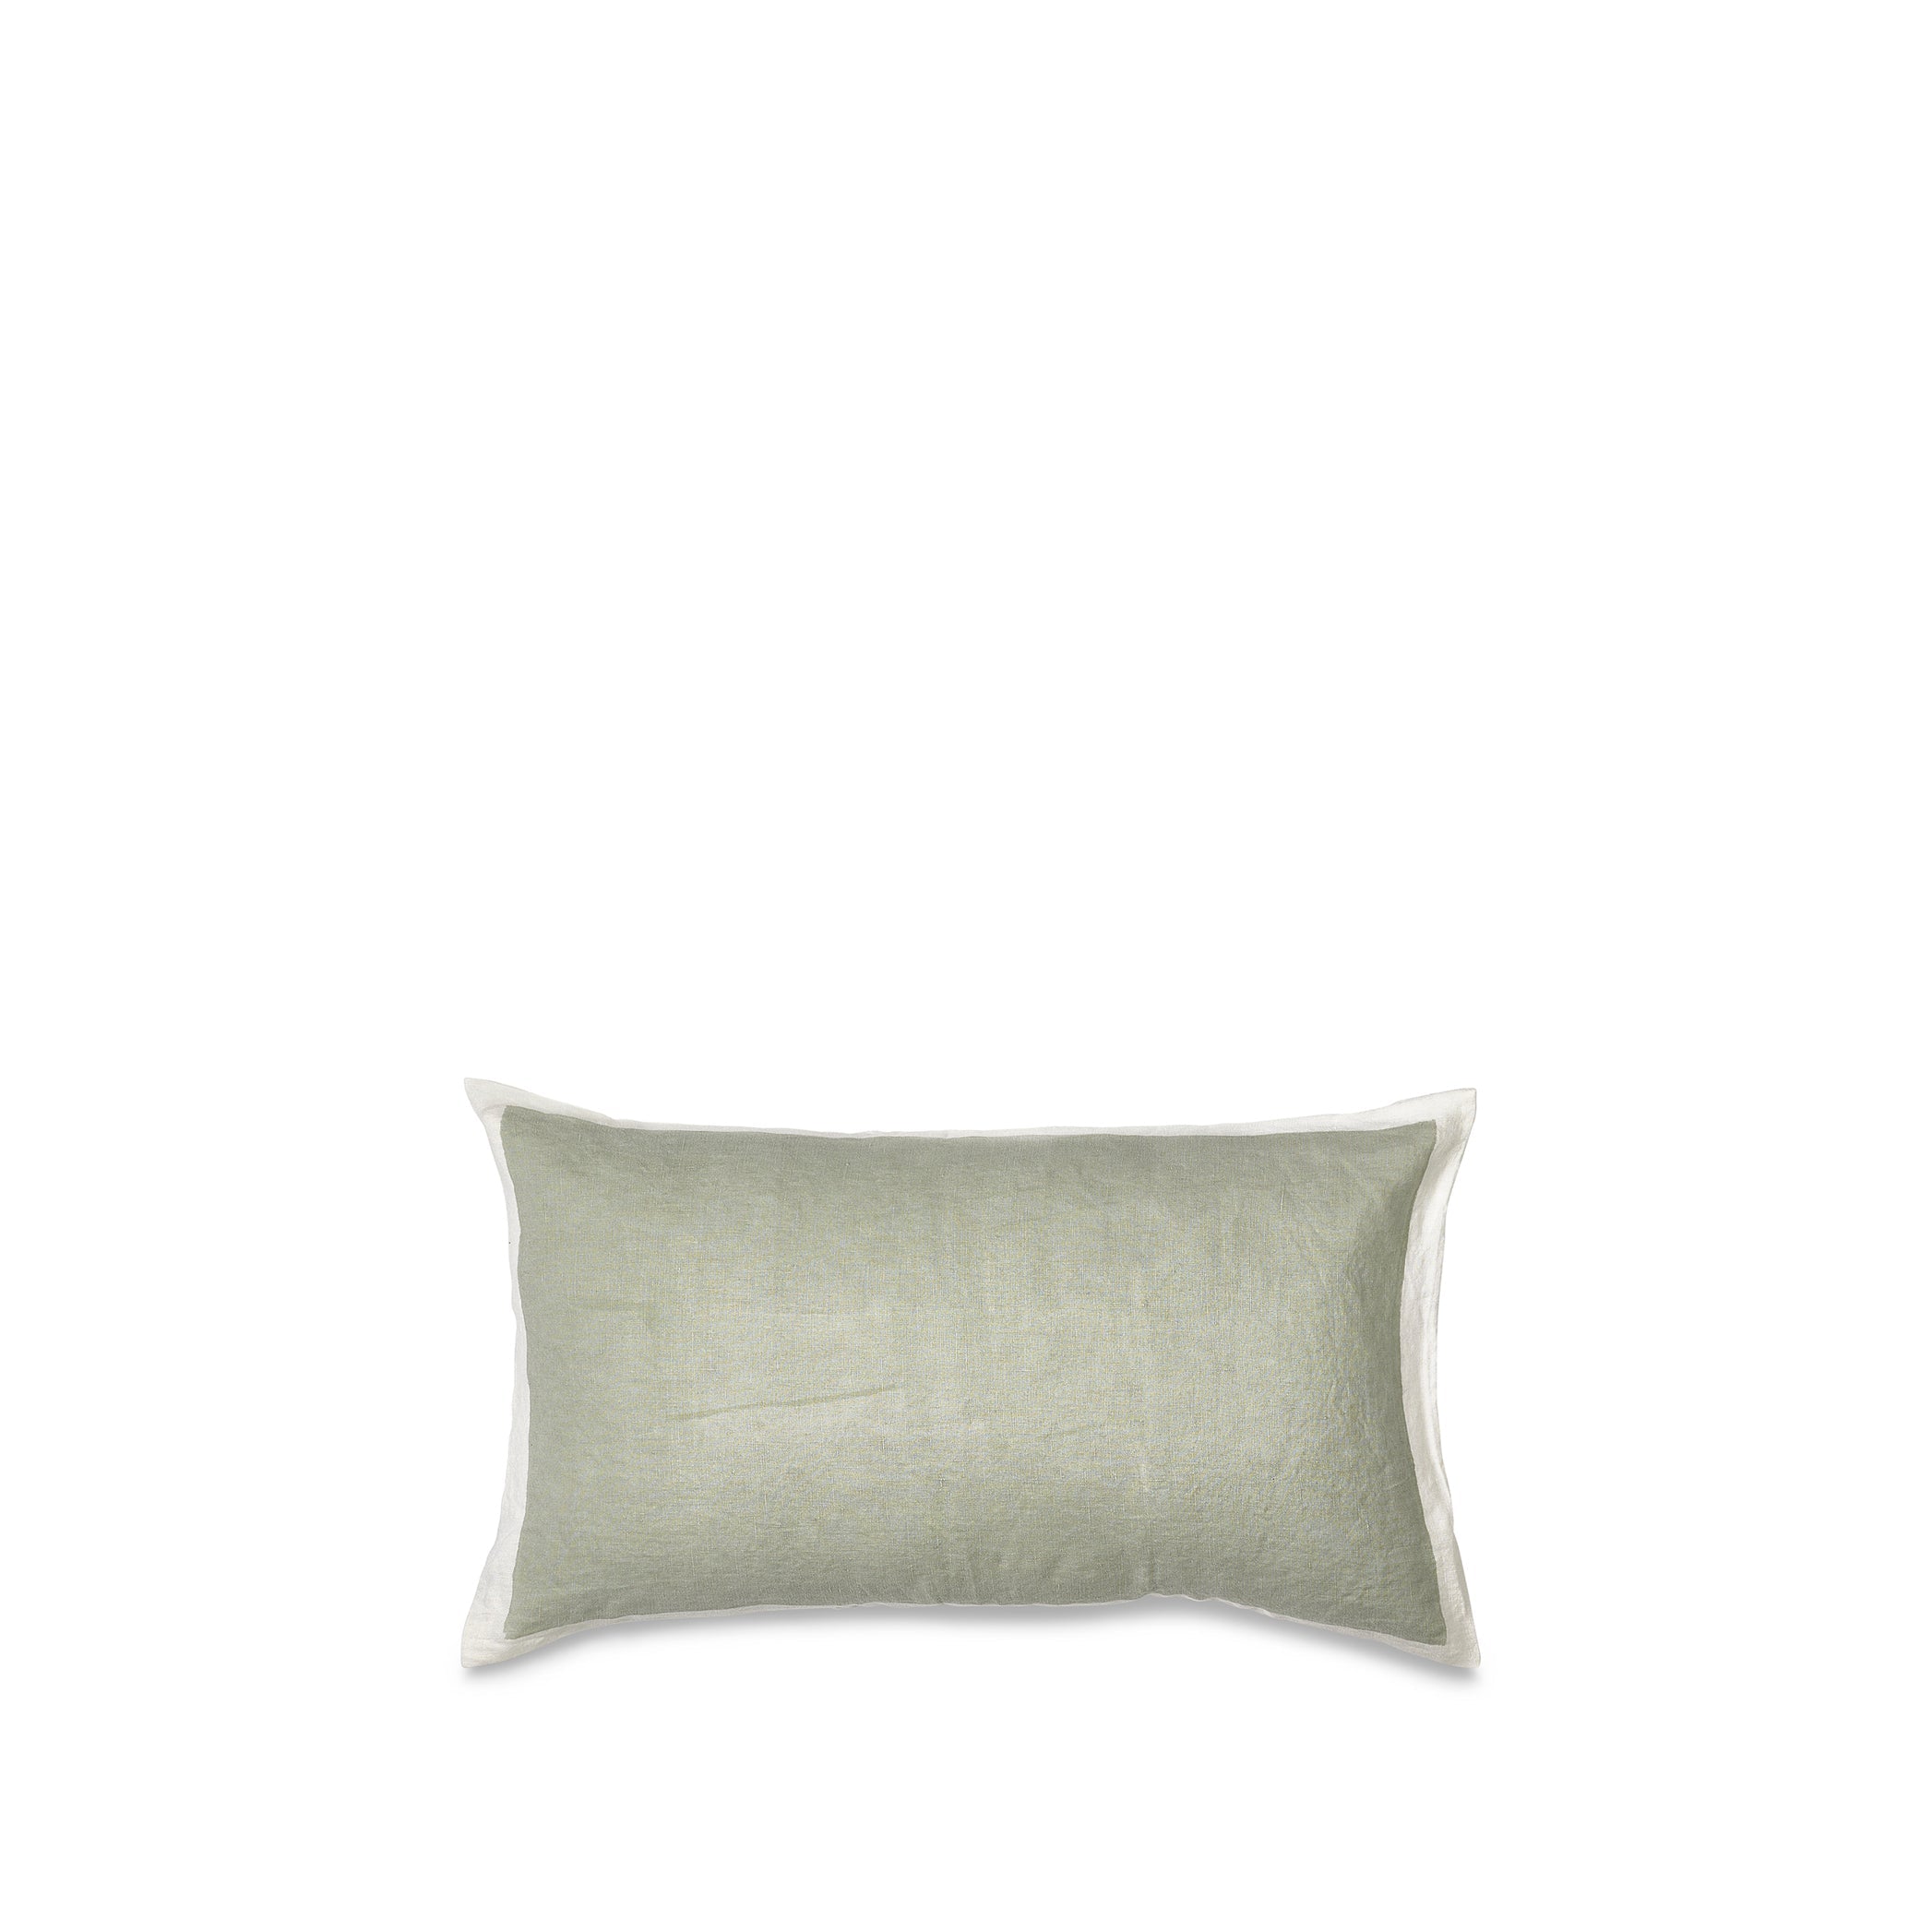 Hand Painted Linen Cushion in Pale Green, 50cm x 30cm